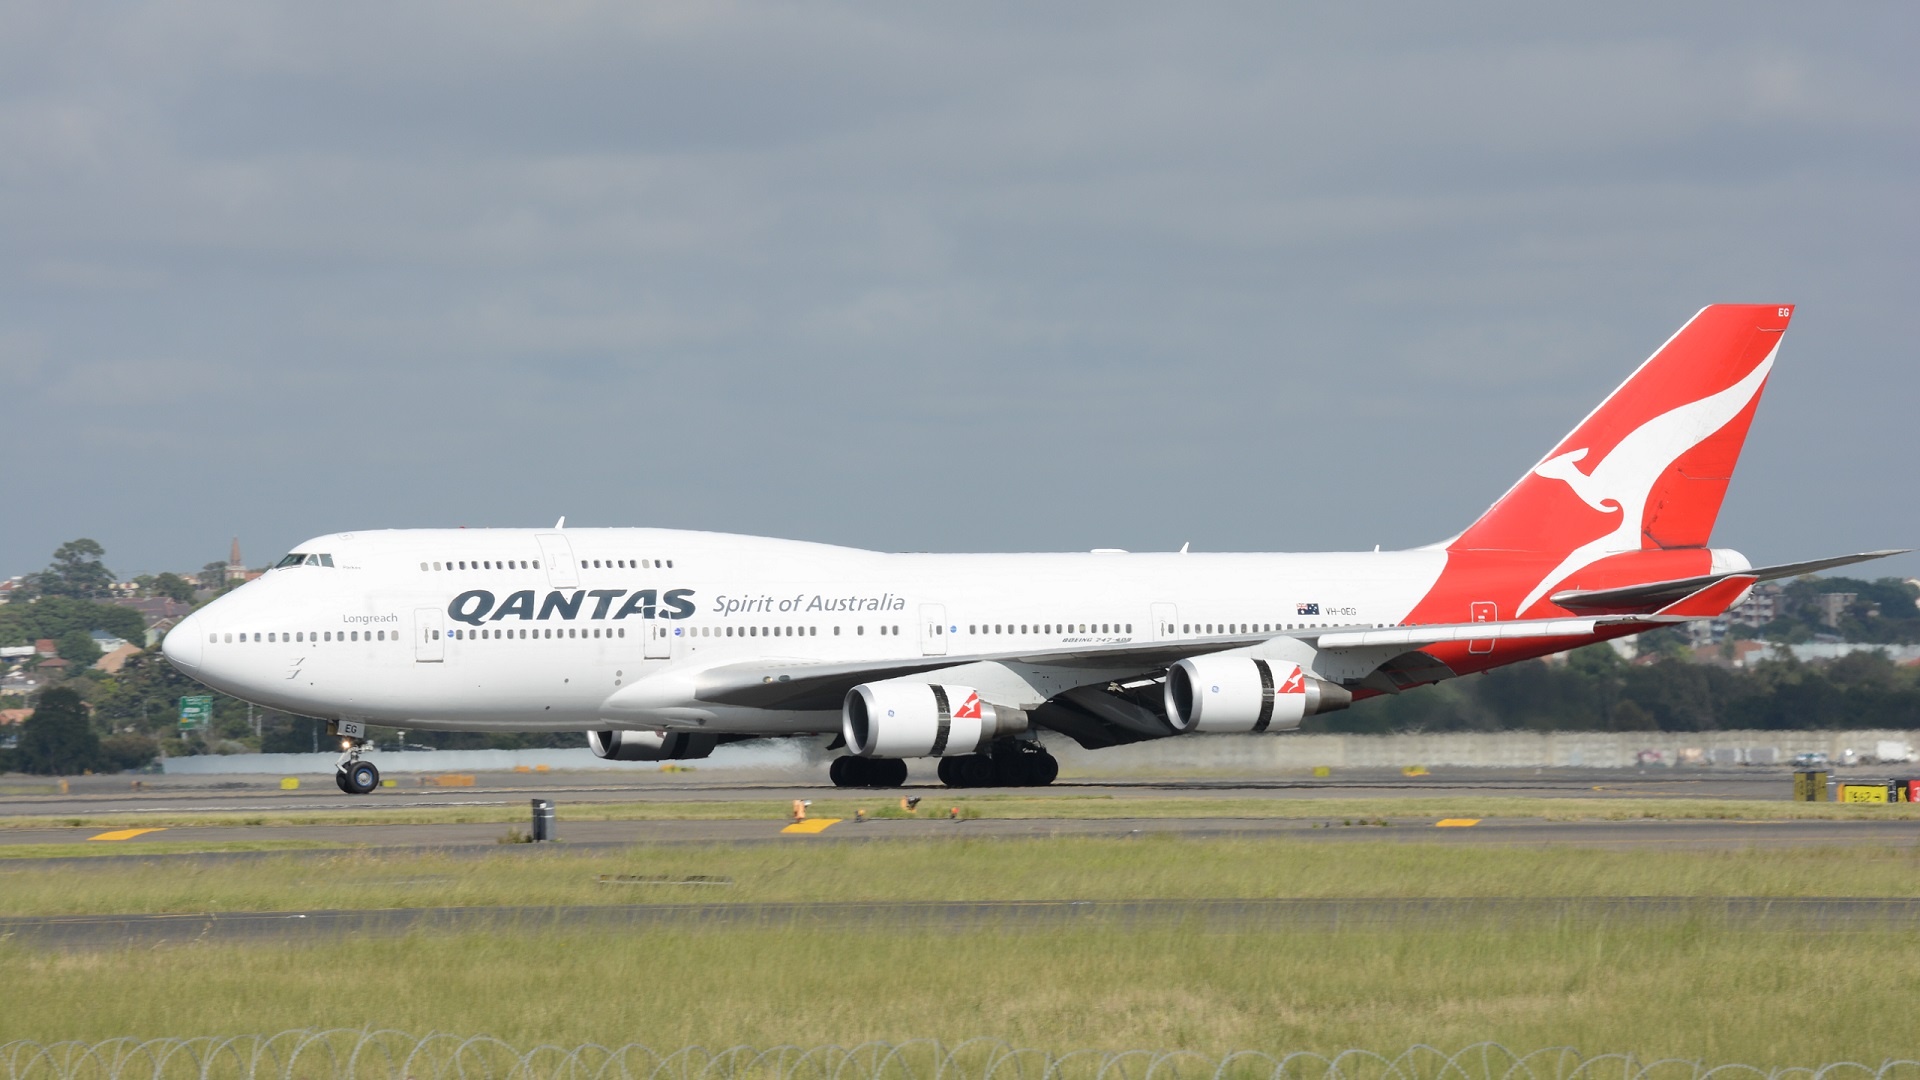 Sydney Airport, Qantas wallpapers, Posted by Christopher Walker, 1920x1080 Full HD Desktop